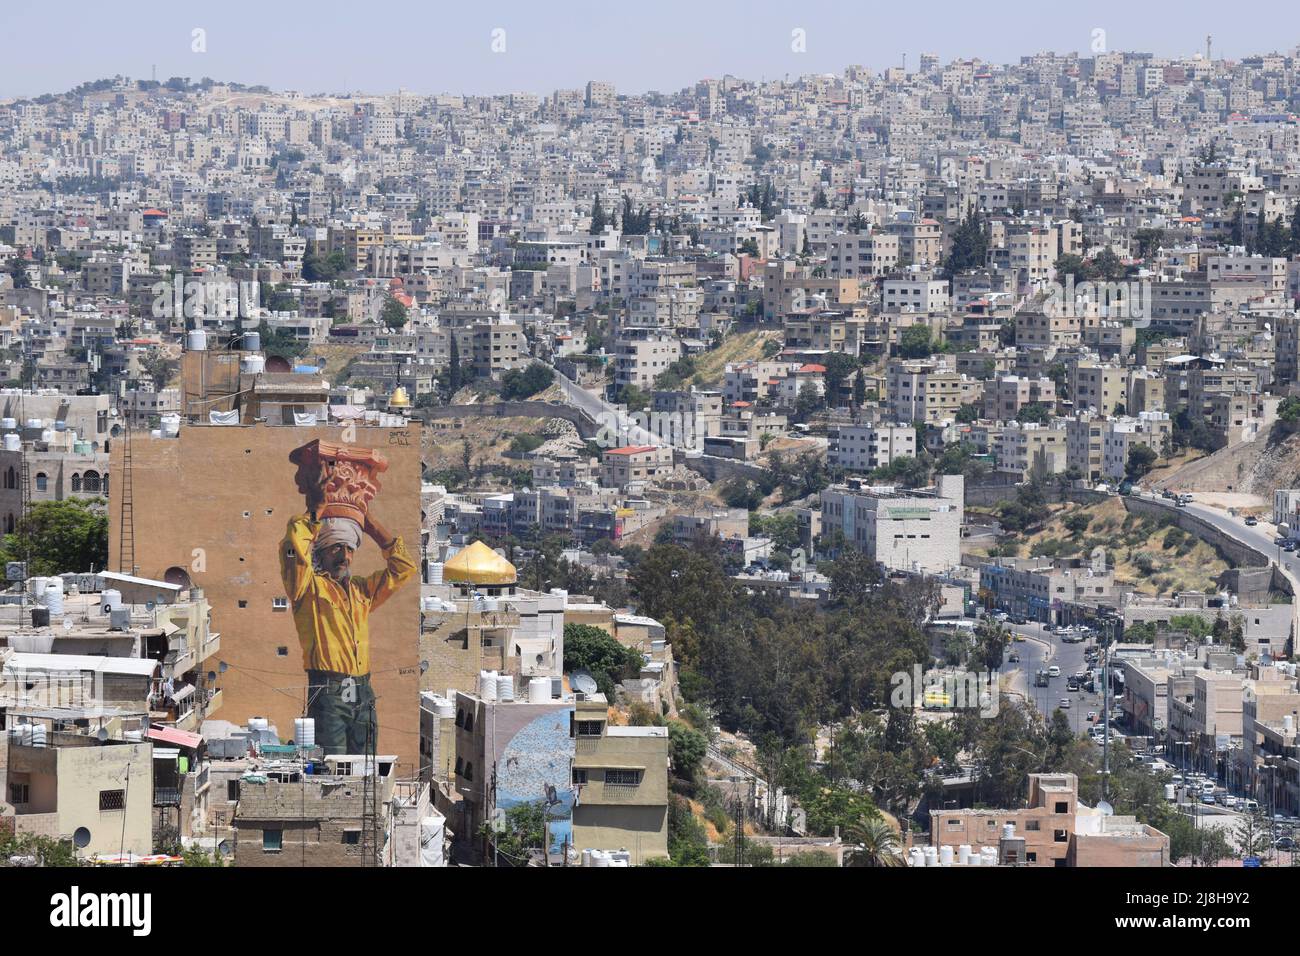 An aerial view of the city of Amman in Jordan with the huge 2021 mural called “The Column” visible on the left hand side of the scene Stock Photo